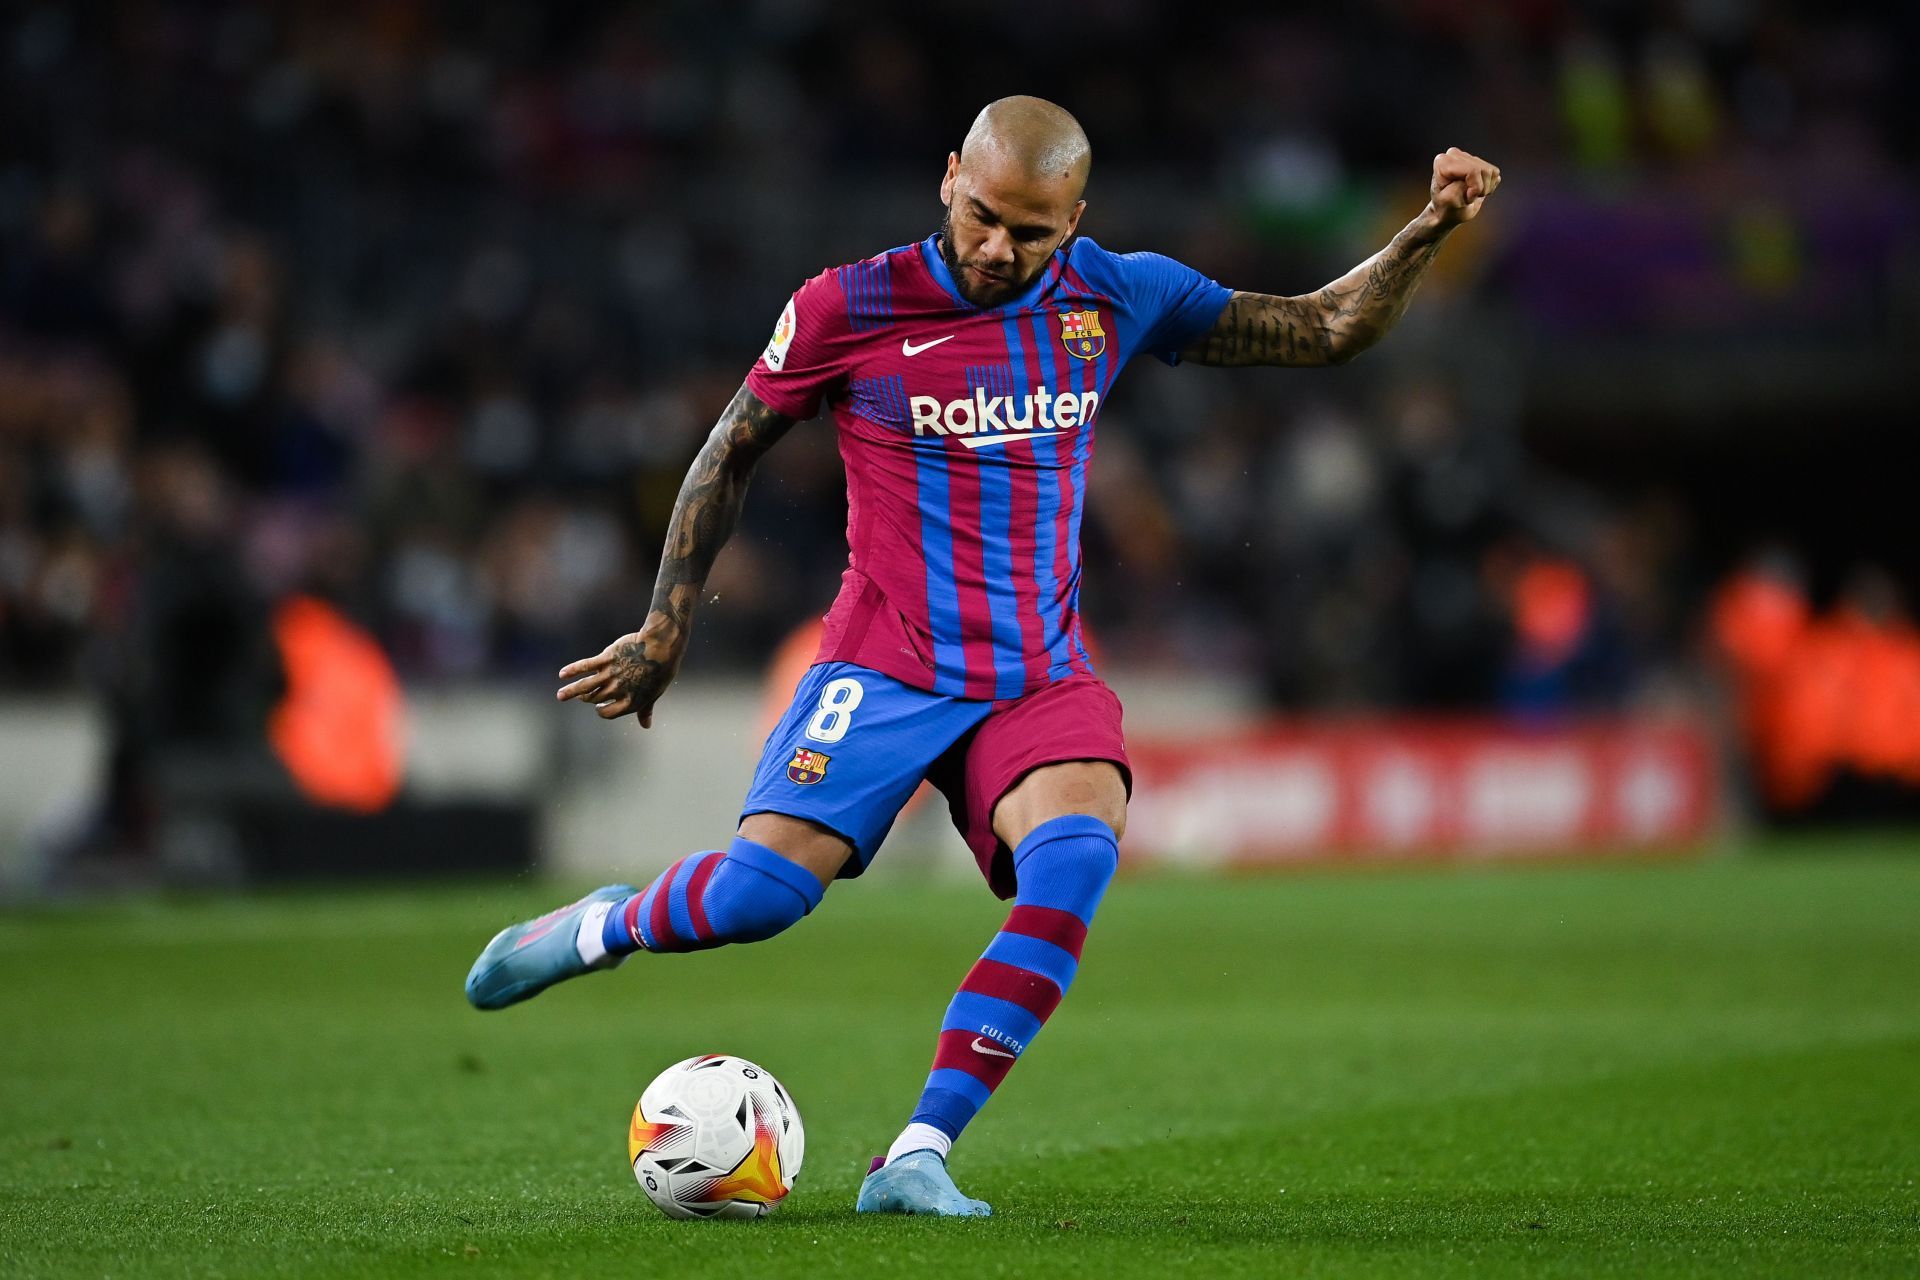 Dani Alves has been an important presence at the Camp Nou this season.